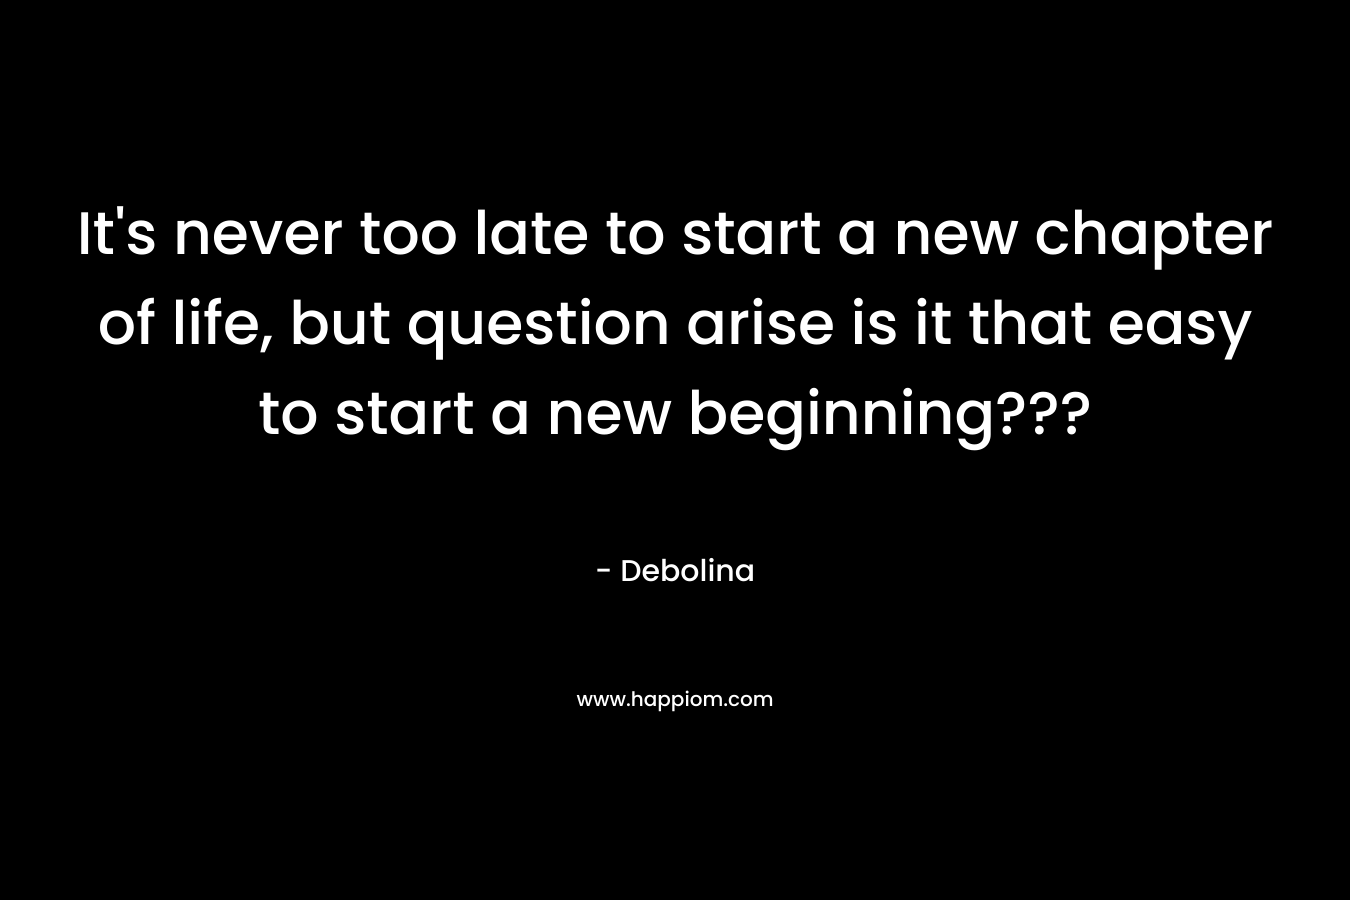 It’s never too late to start a new chapter of life, but question arise is it that easy to start a new beginning??? – Debolina